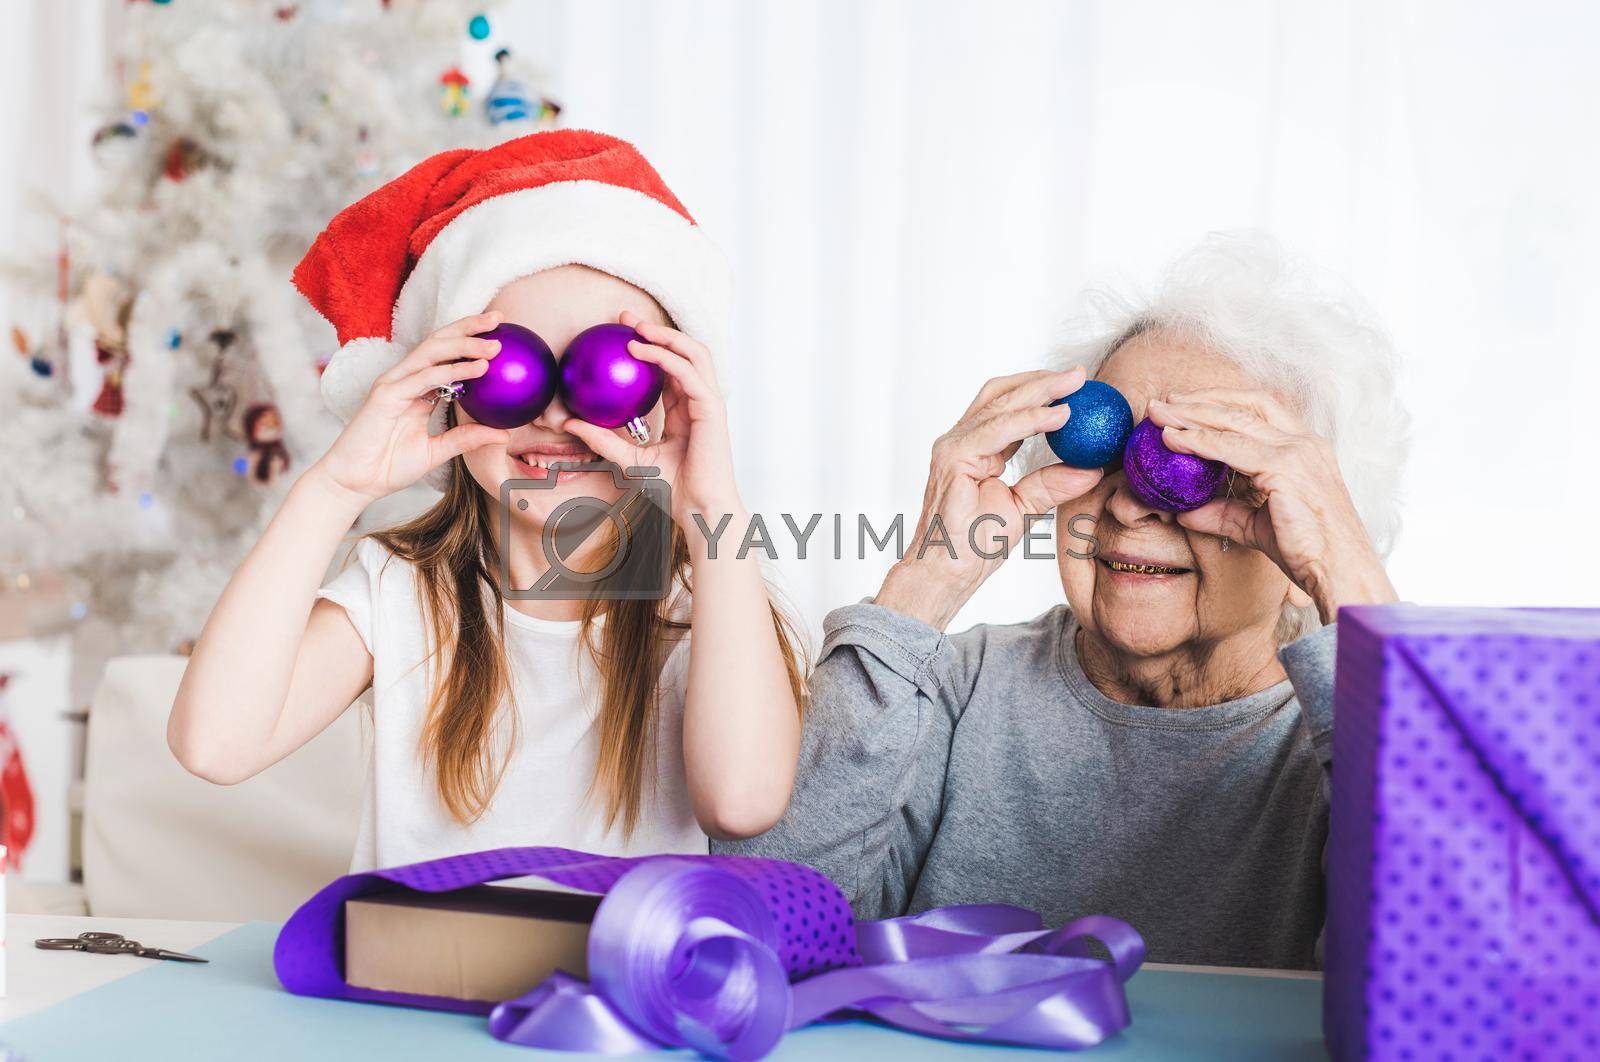 Royalty free image of Granddaughter holding decorative balls with grandma by GekaSkr